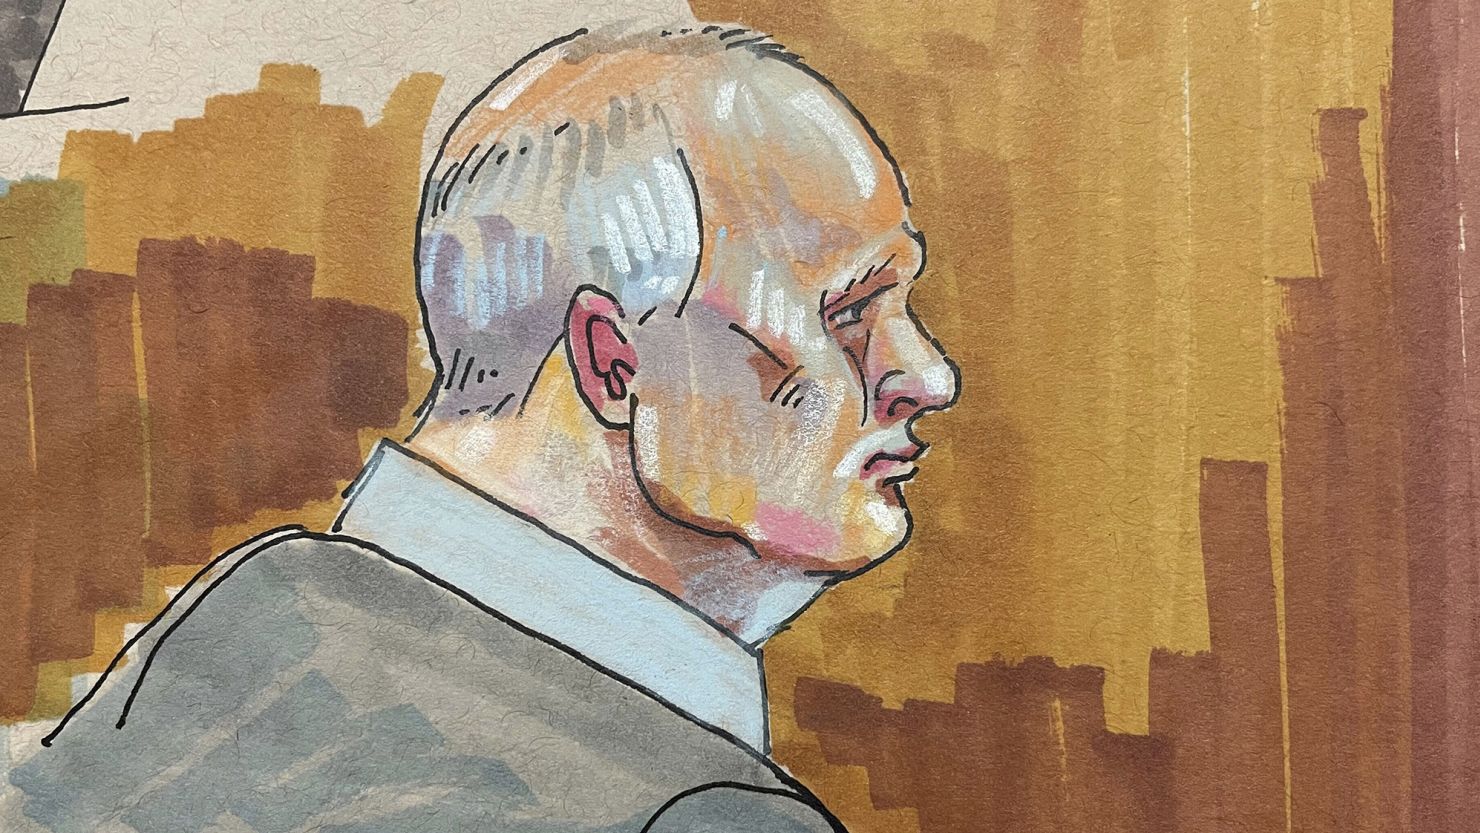 Robert Bowers, the shooter in the 2018 Pittsburgh synagogue massacre, sits in court Tuesday, May 30, 2023.